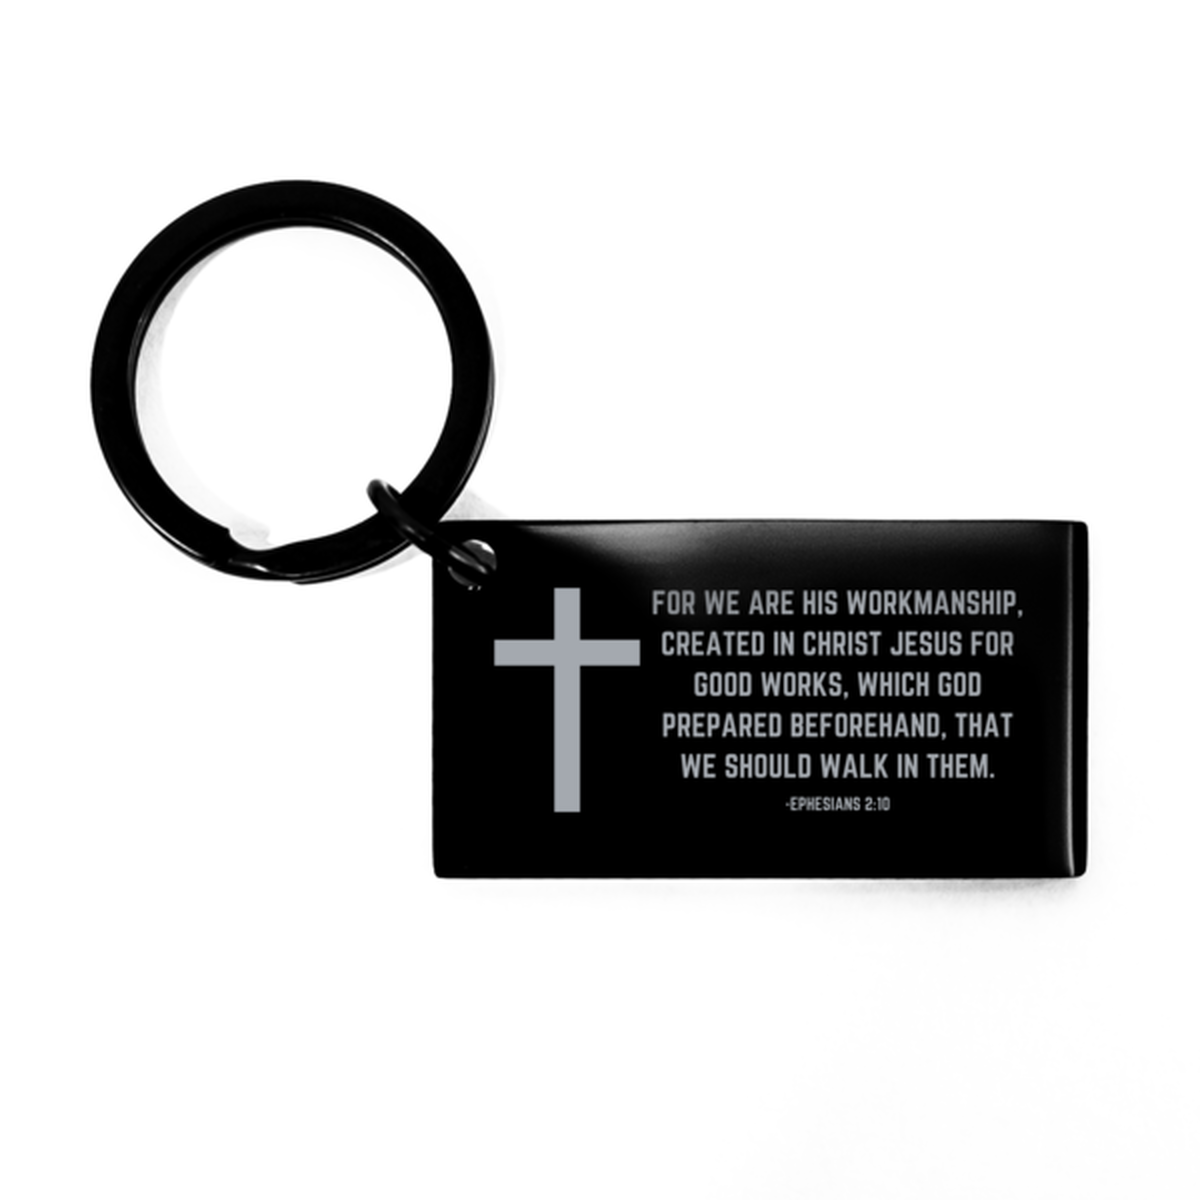 Baptism Gifts For Teenage Boys Girls, Christian Bible Verse Black Keychain, For we are His workmanship, Confirmation Gifts, Bible Verse Keyring for Son, Godson, Grandson, Nephew